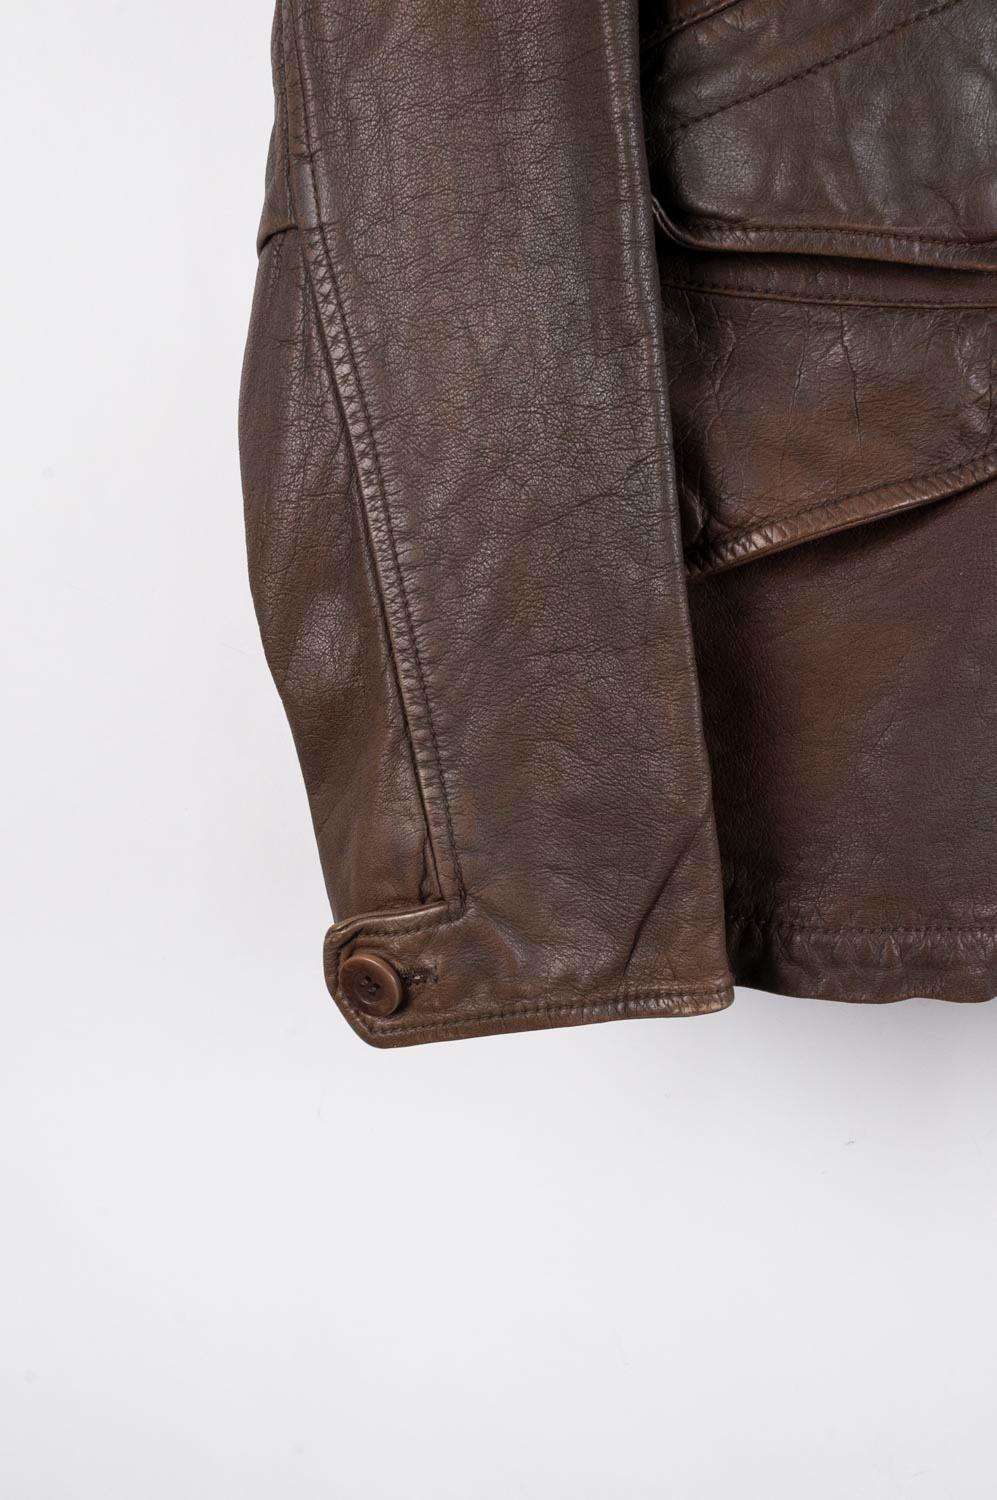 Rick Owens Leather Men Jacket 2010 Size M In Good Condition For Sale In Kaunas, LT